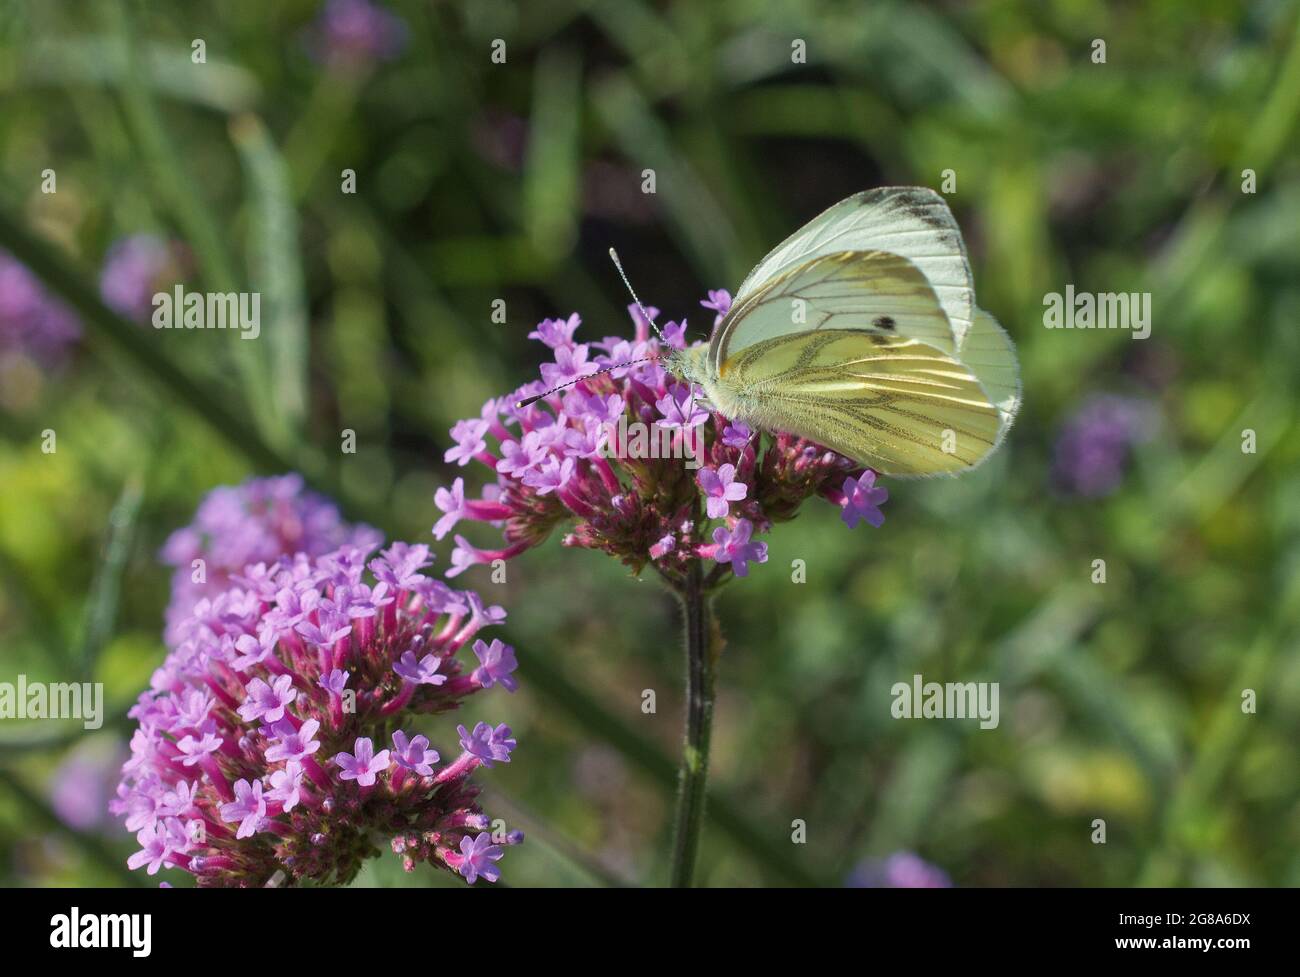 Pieris brassicae, the Large White, female of strong flying butterfly feasting on a purple blossom of milkweeds. Stock Photo